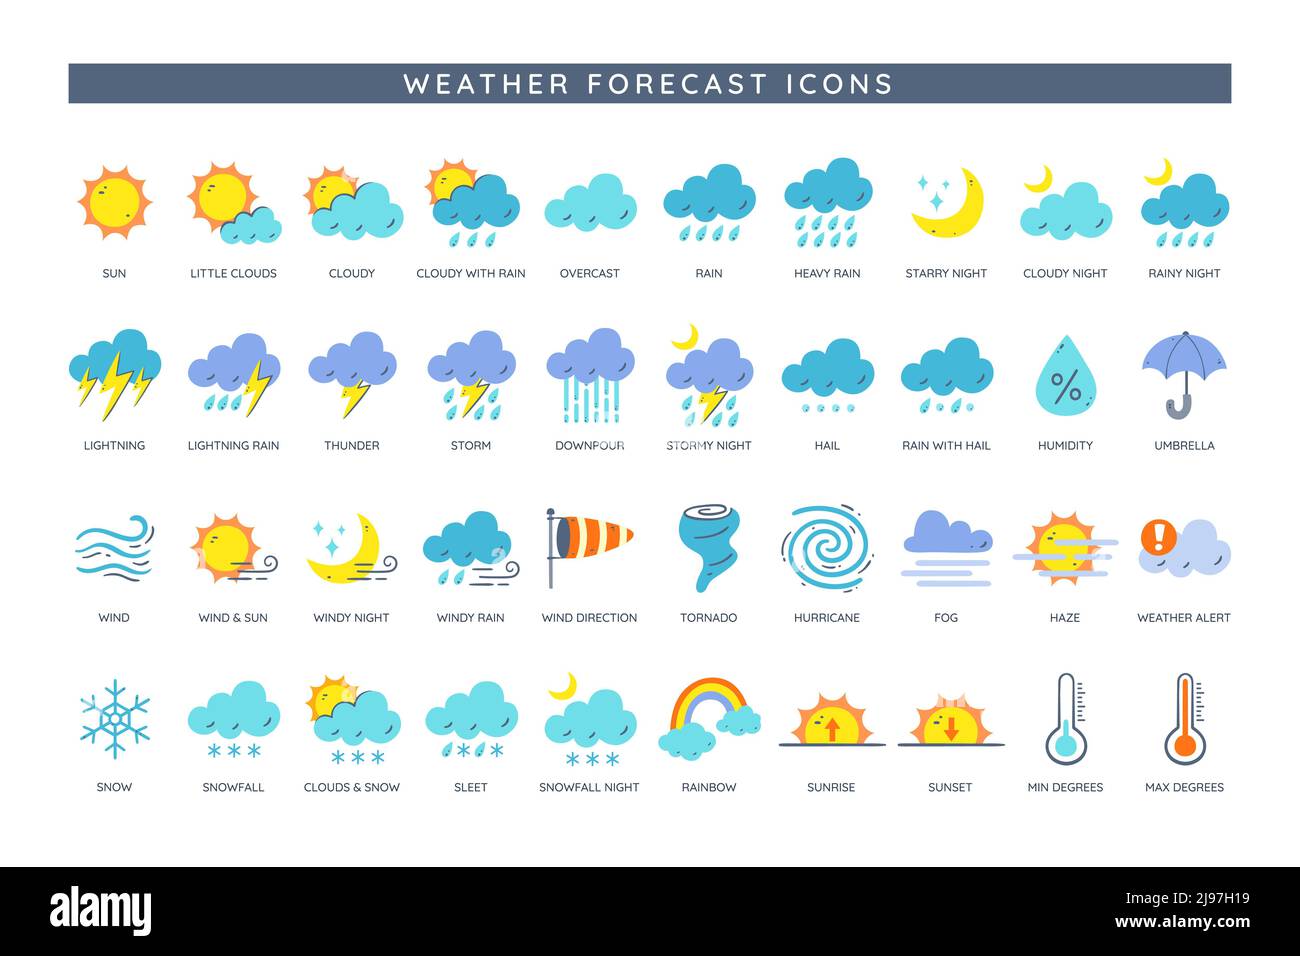 132,900 Windy Weather Images, Stock Photos, 3D objects, & Vectors